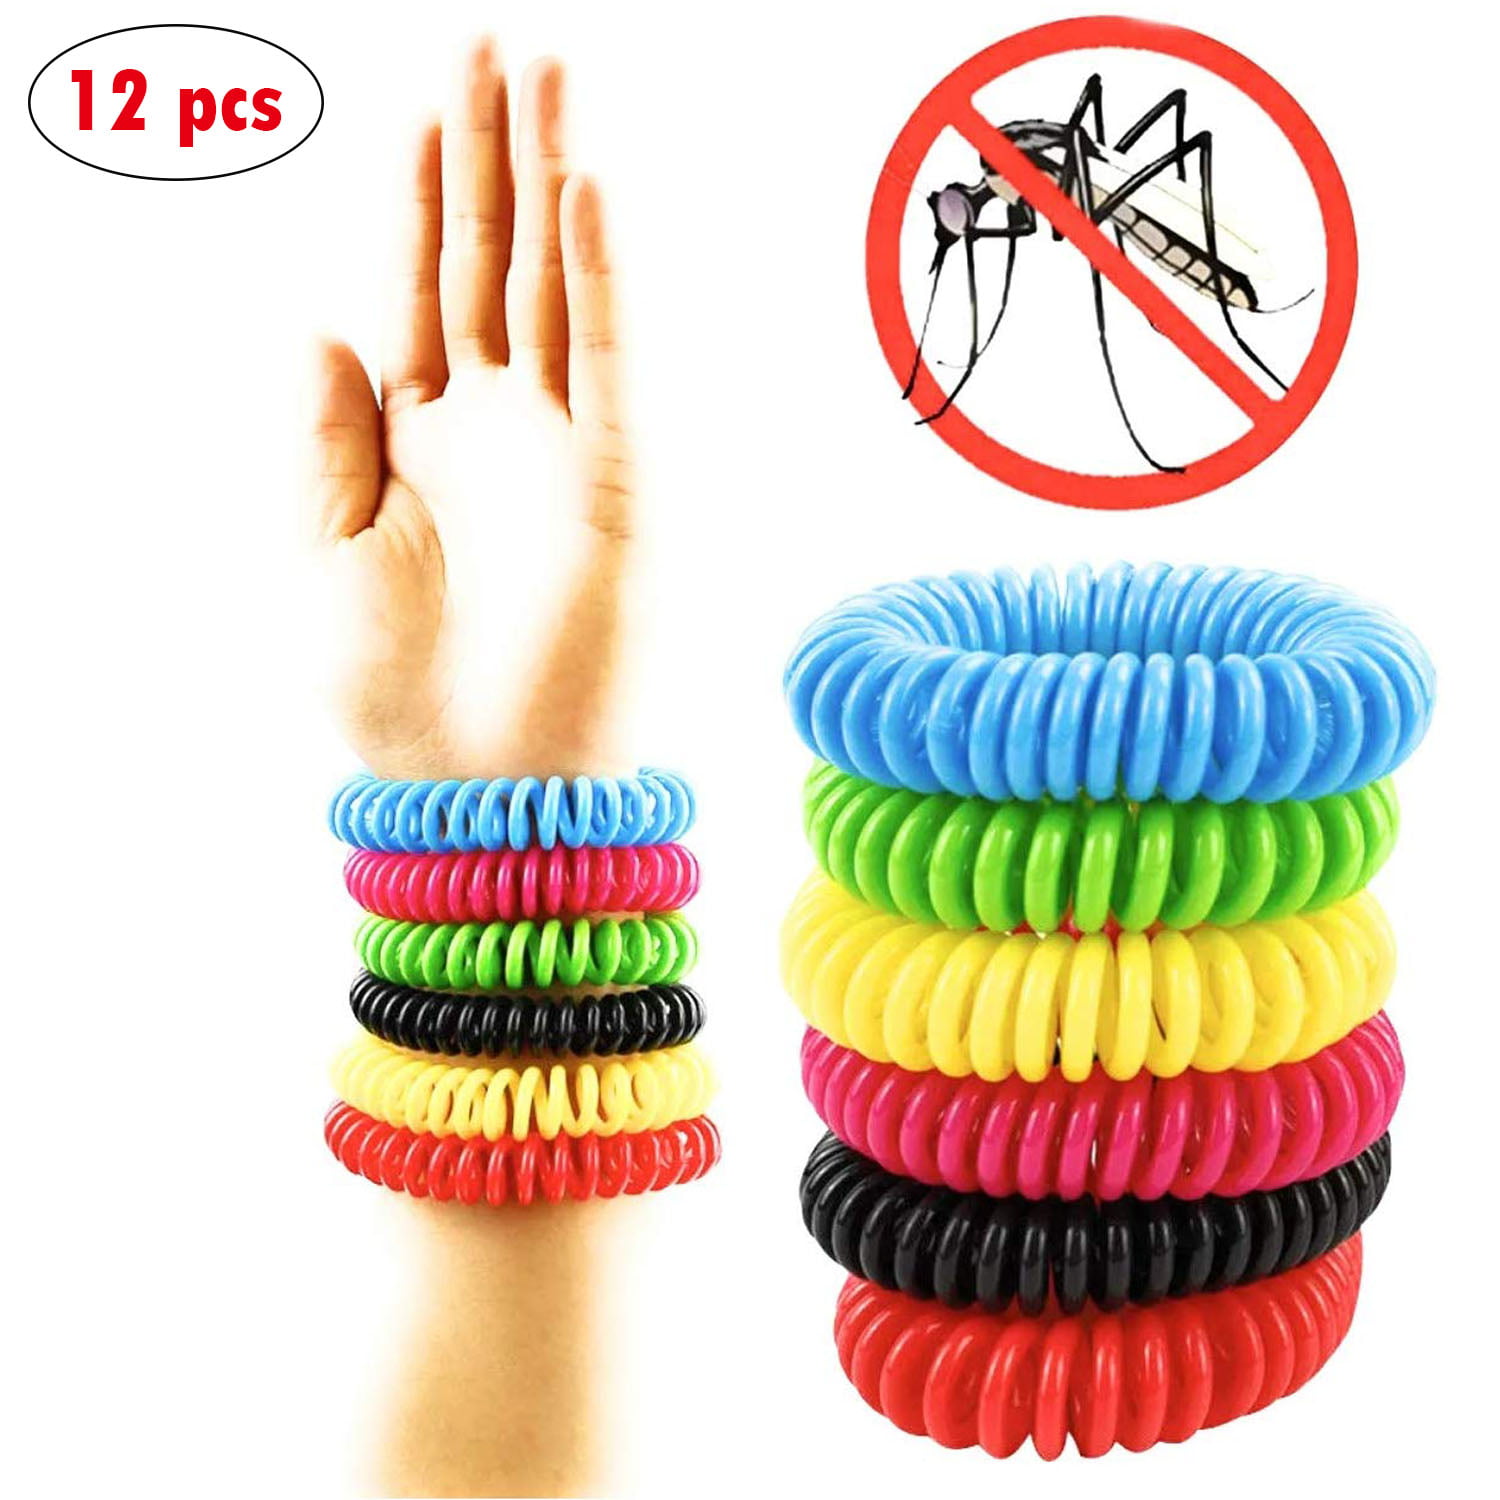 40 Anti Mosquito Insect Repellent Bracelet Natural Waterproof Spiral Wrist Bands 